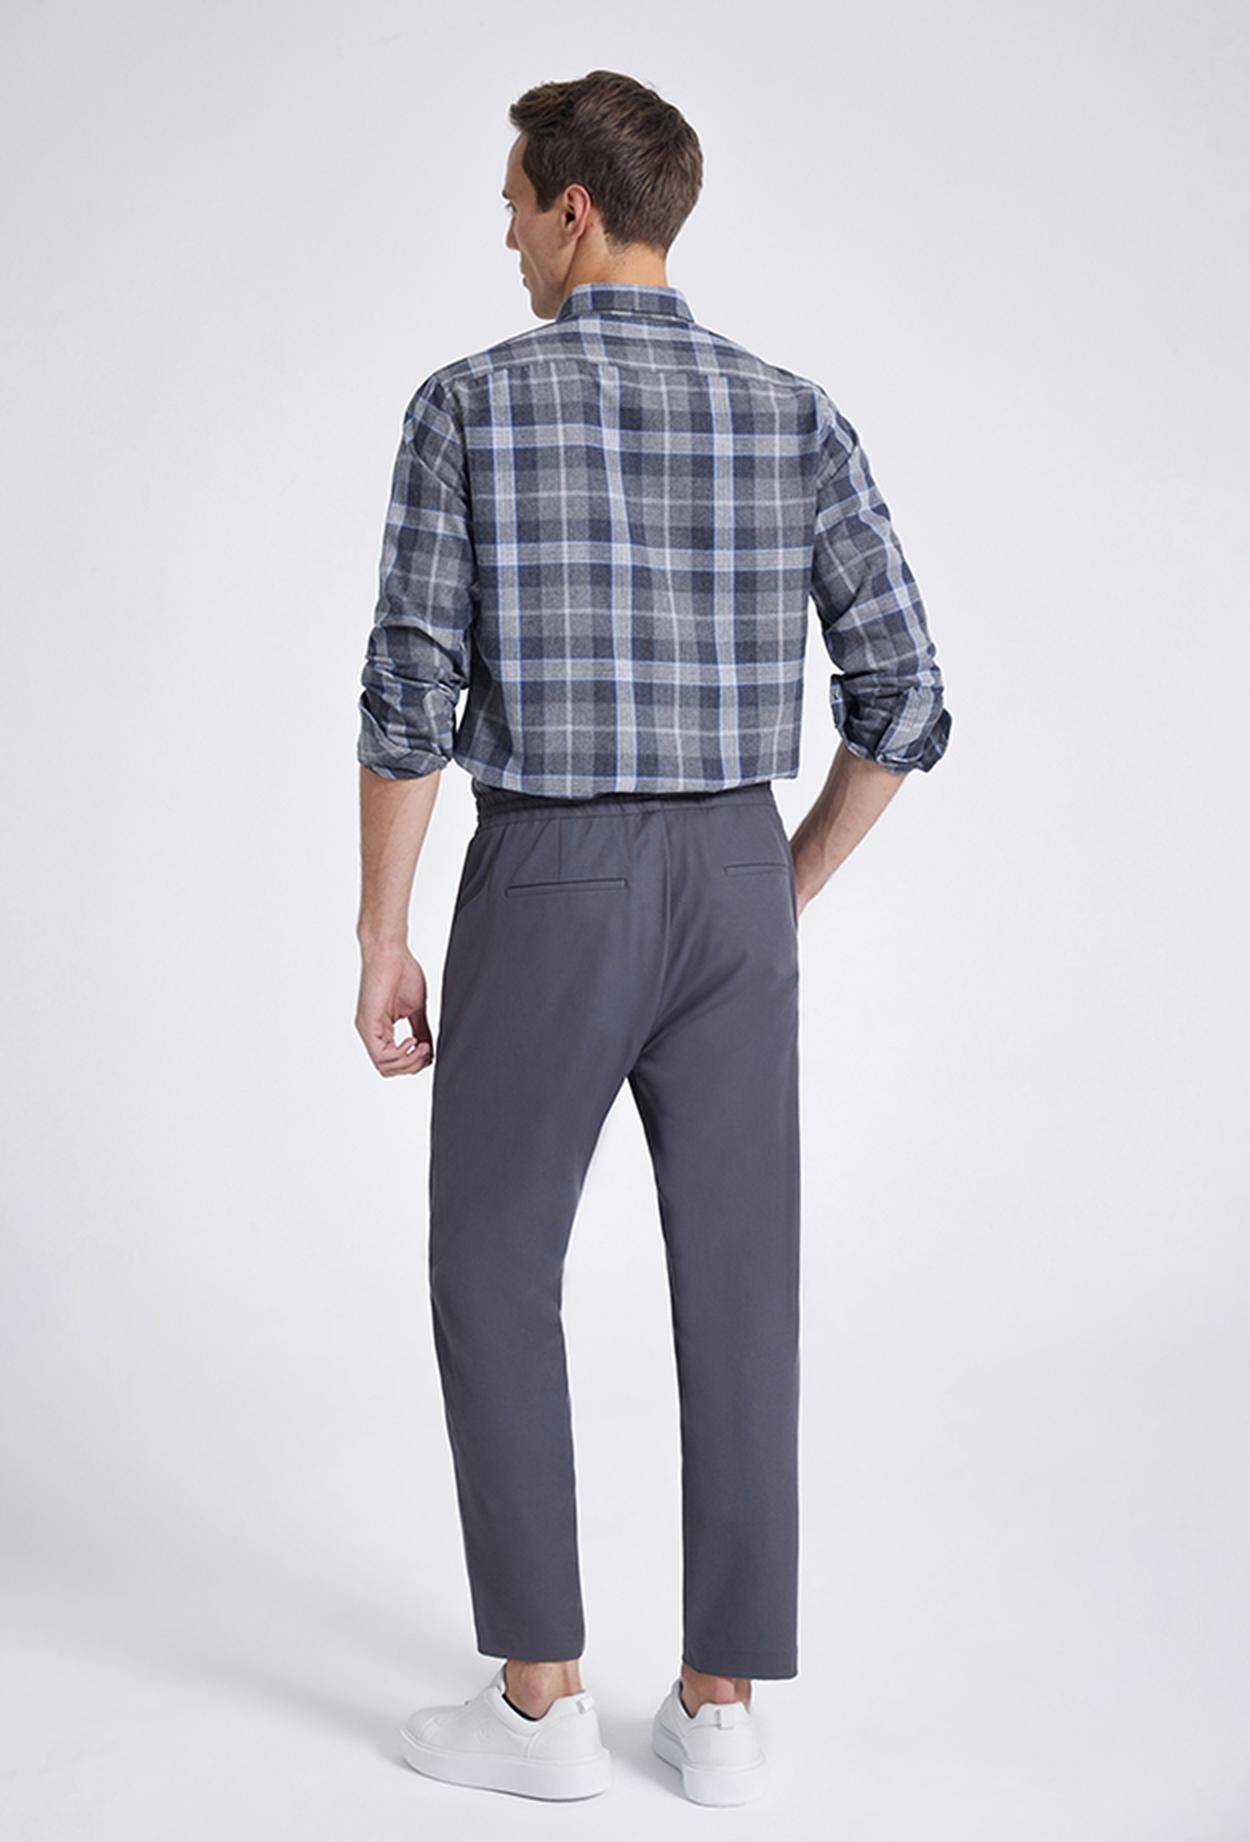 Twn Relaxed Fit Antrasit Jogger Pantolon